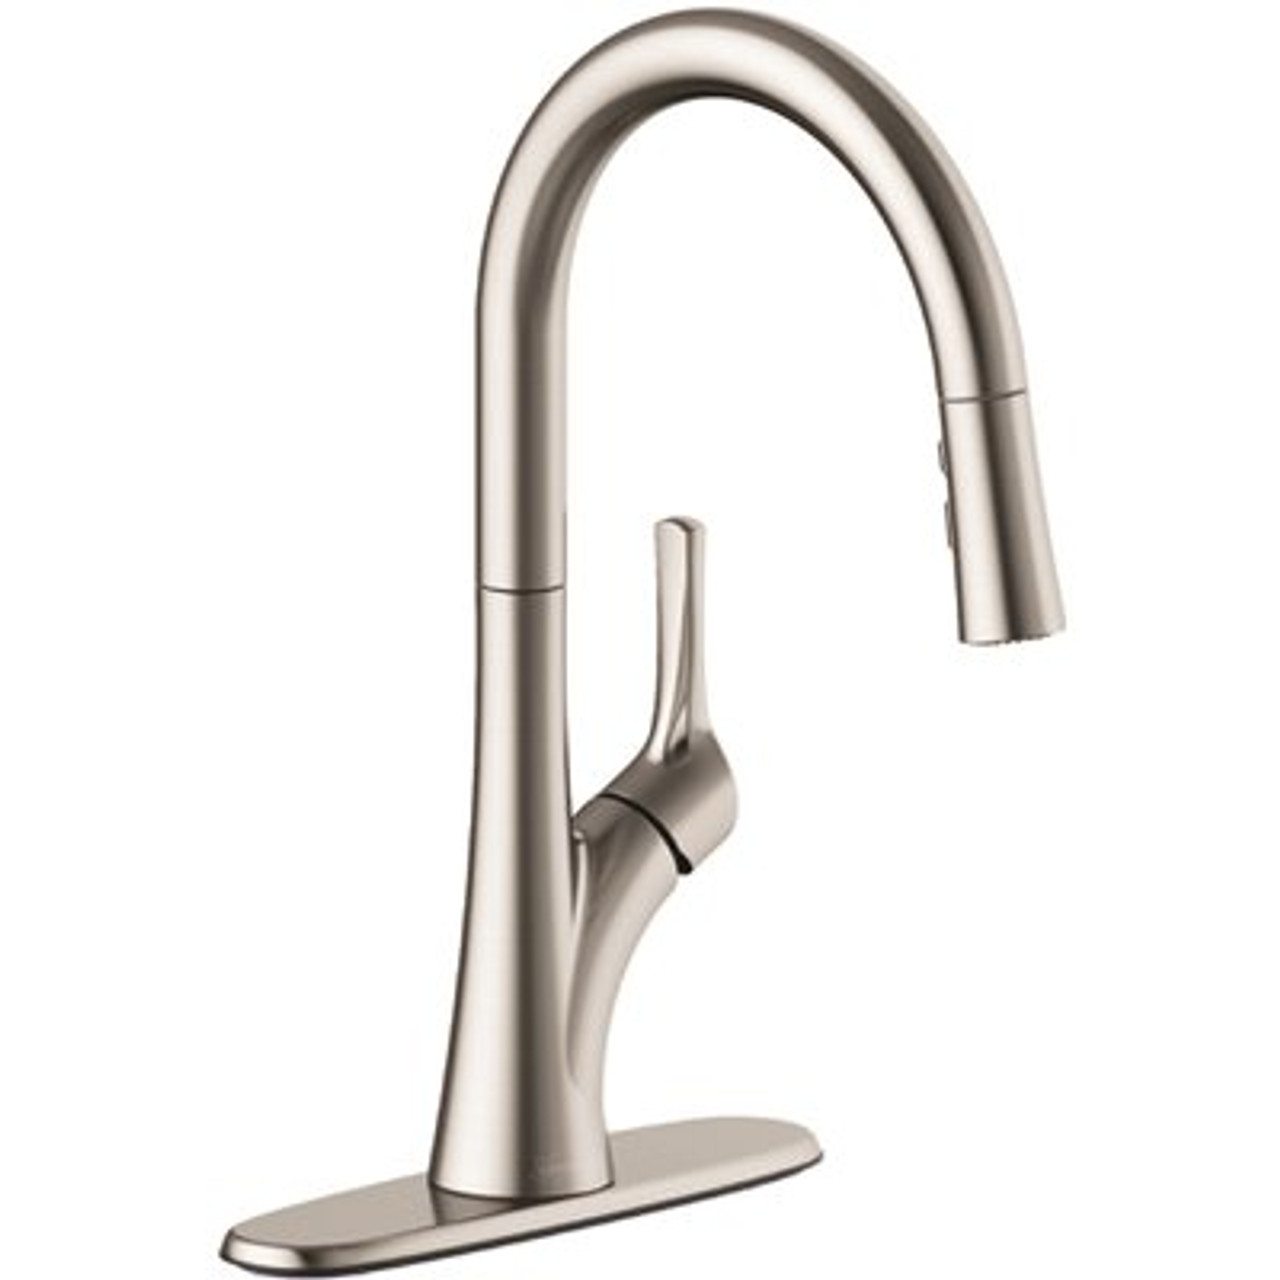 Seasons Westwind Single-Handle Pull Down Sprayer Kitchen Faucet in Stainless Steel